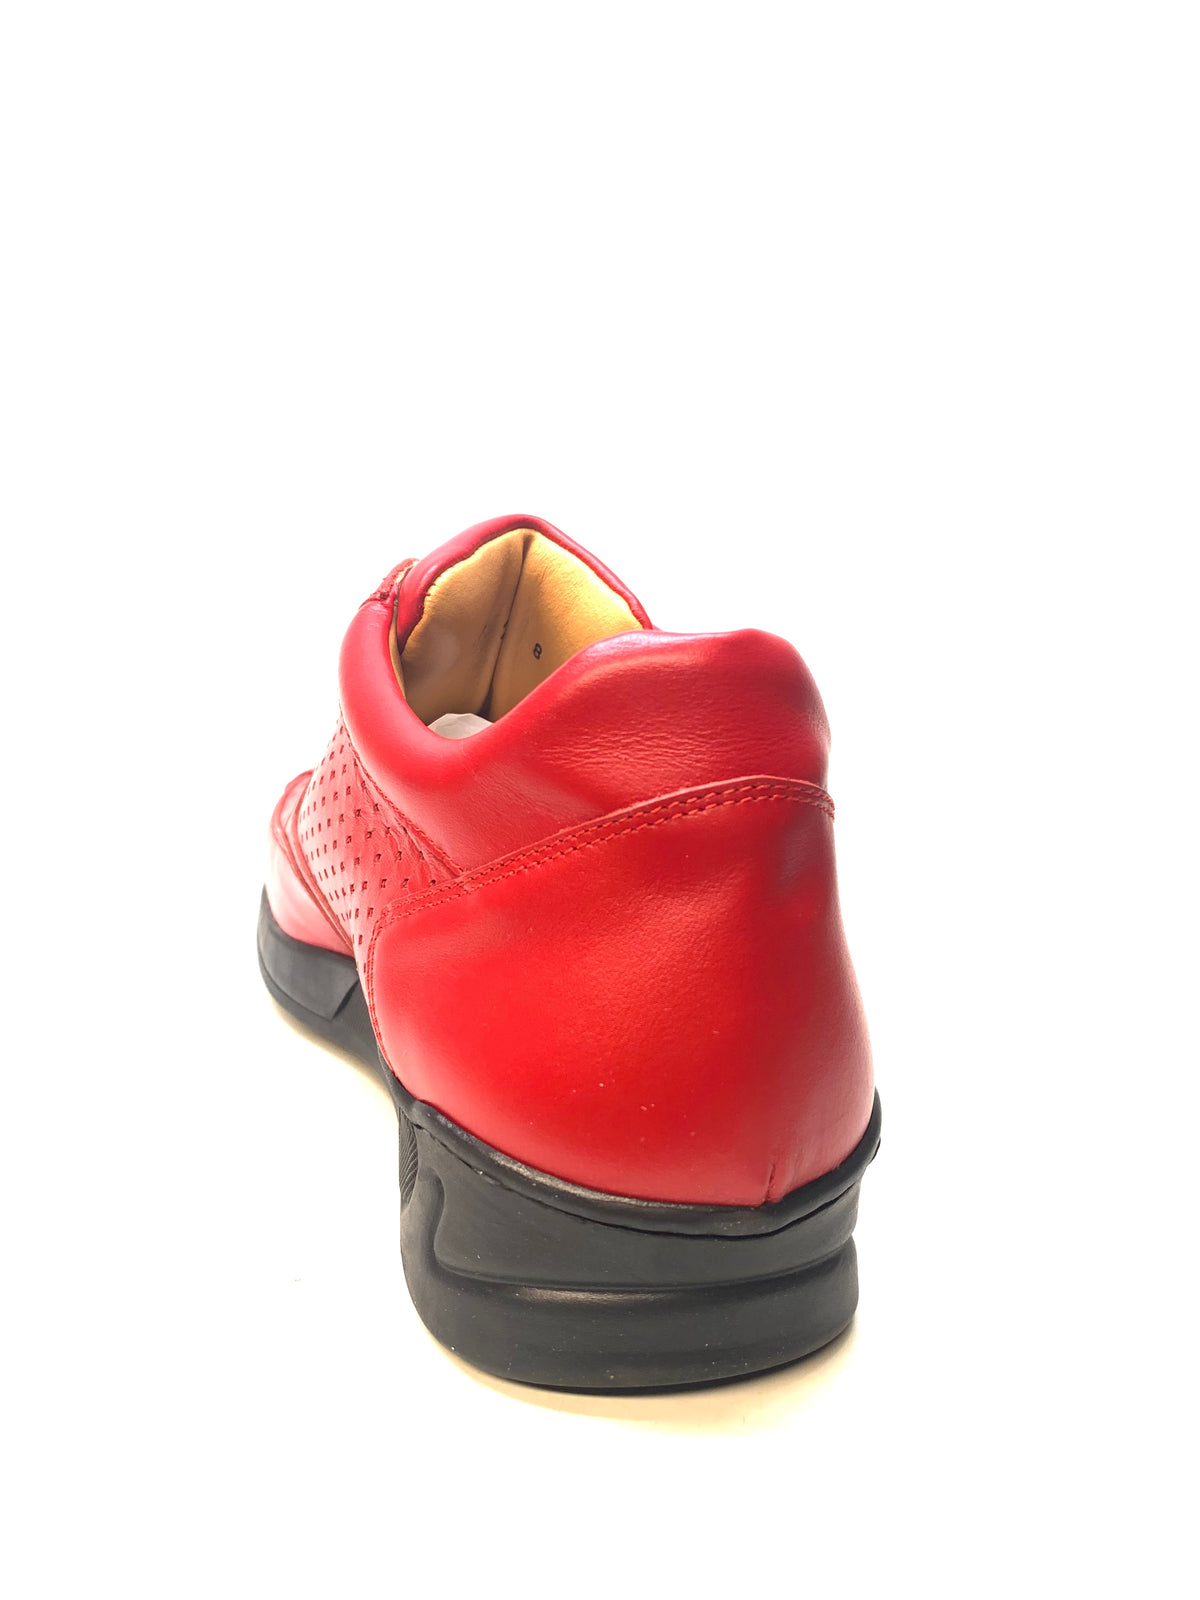 Mauri M770 Red Crocodile Perforated Nappa Leather Sneaker - Dudes Boutique